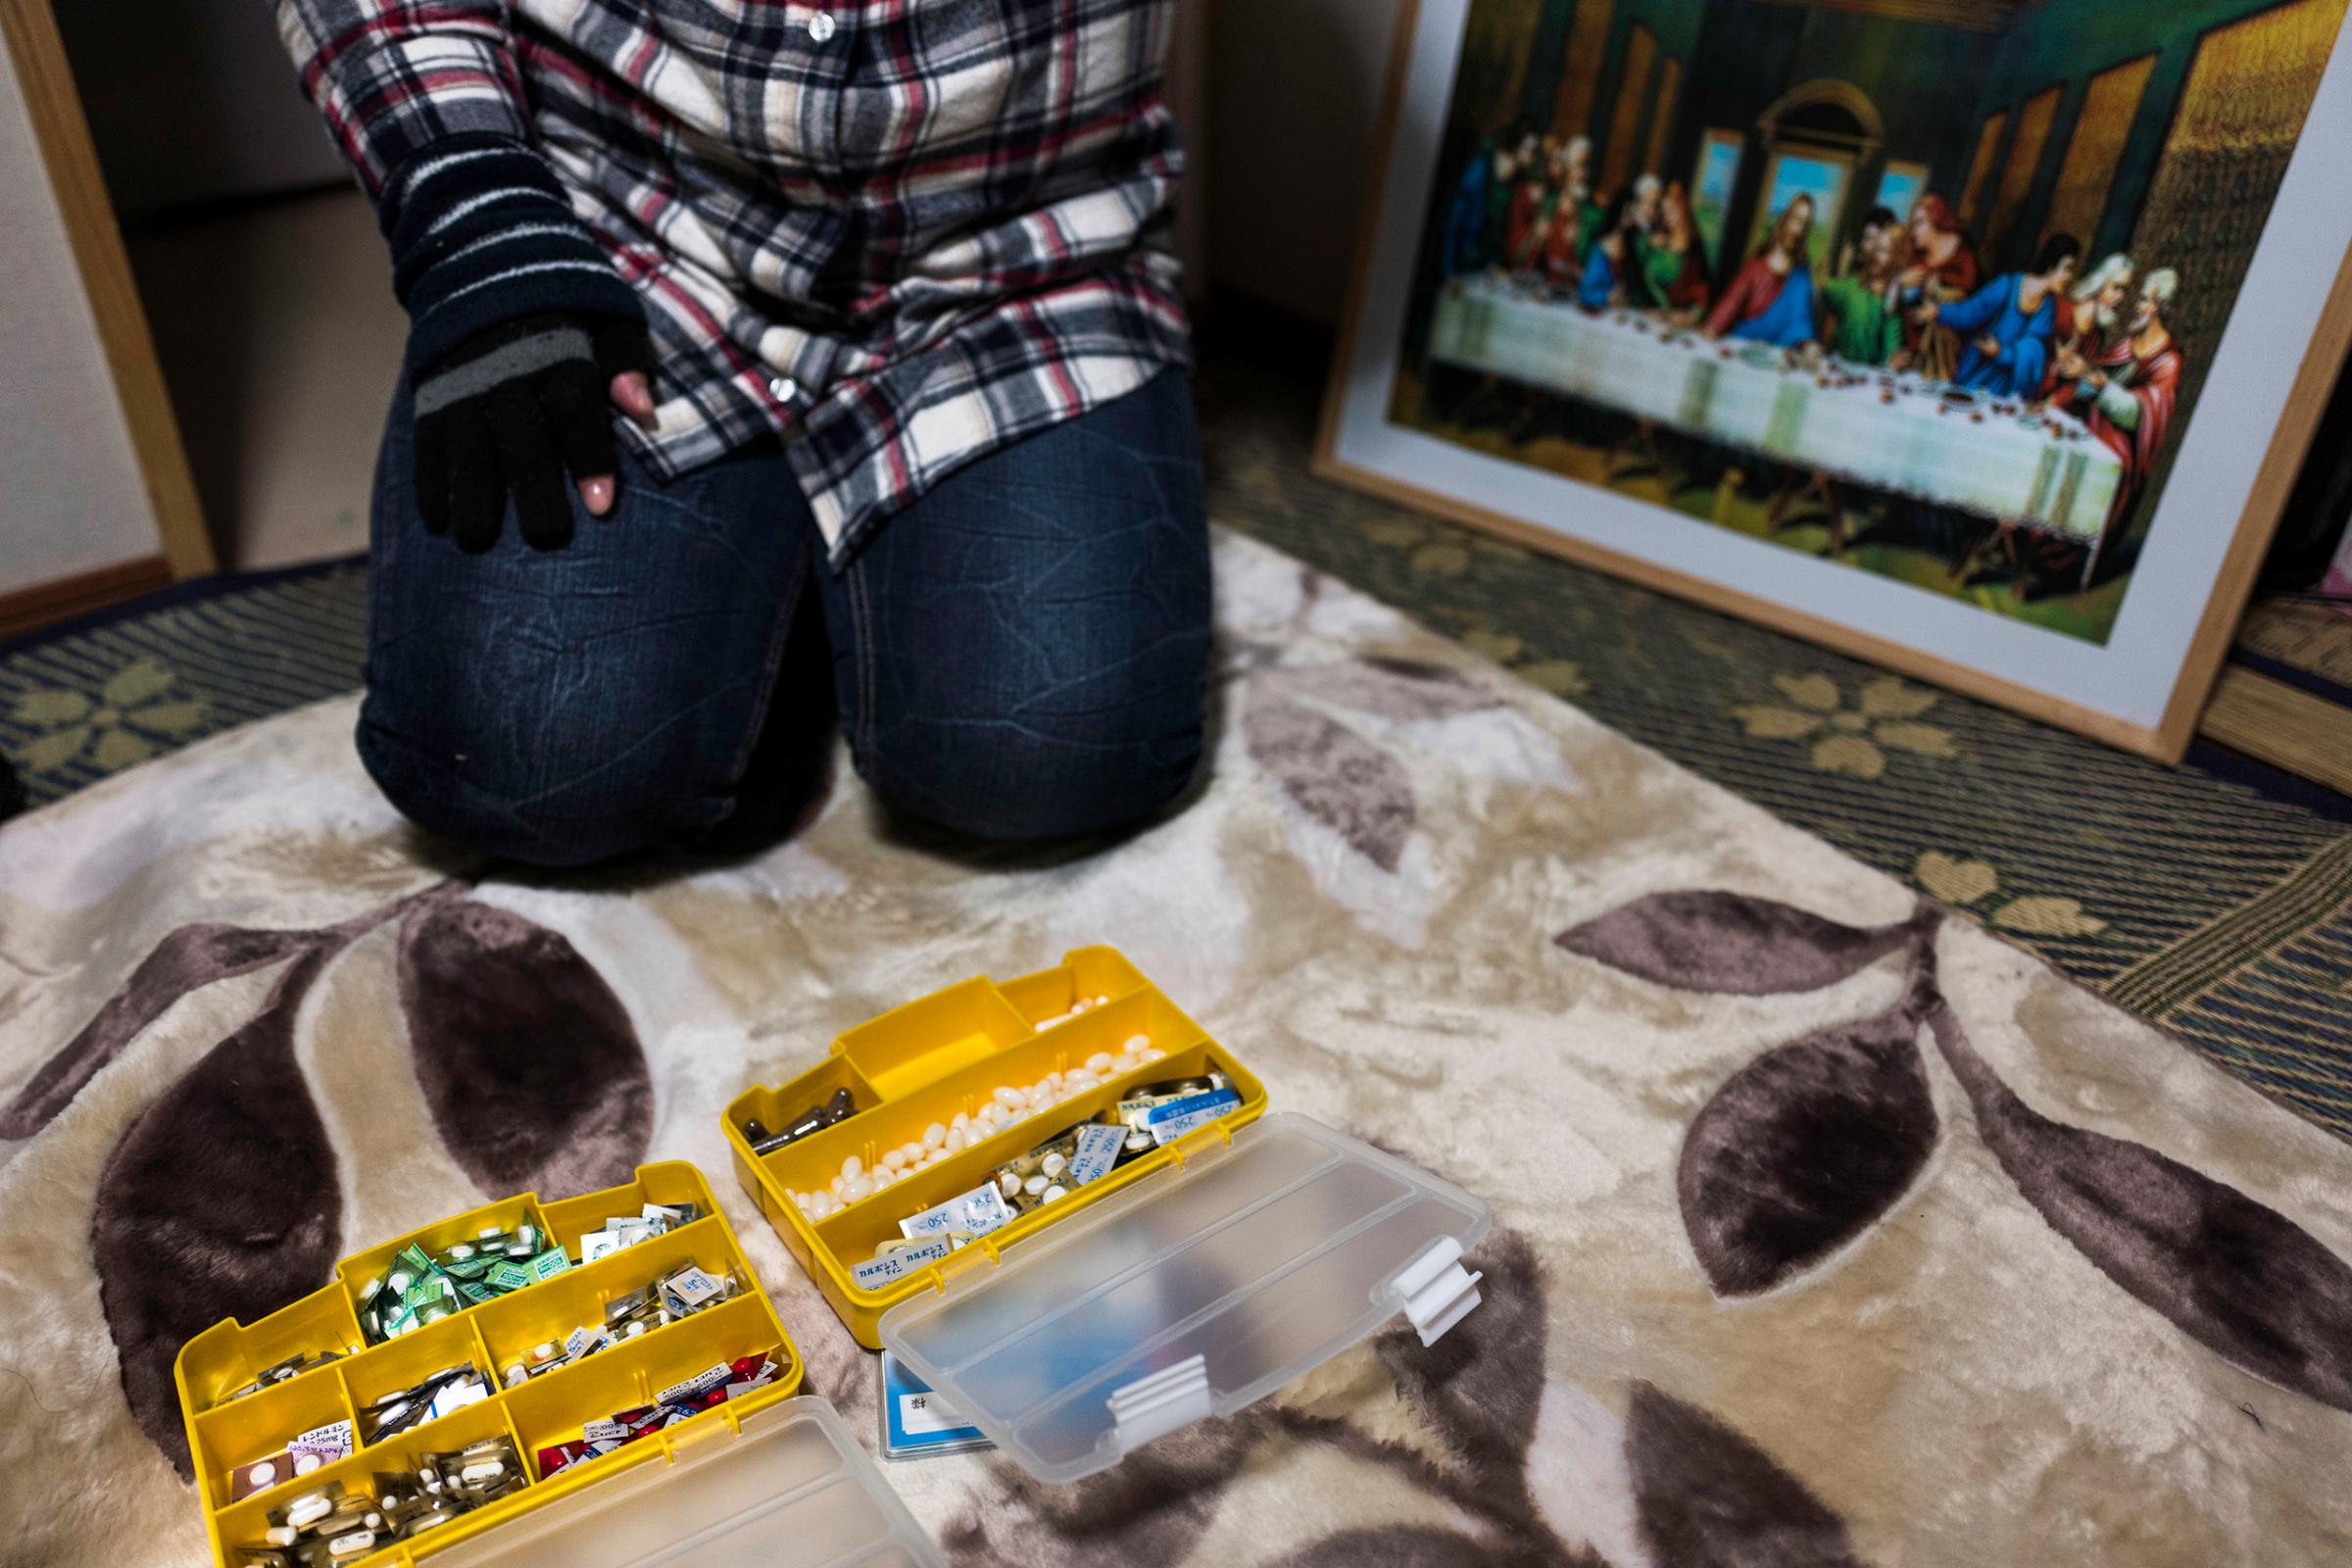 Terumi Murakami, a 43-year-old mother of three children and an evacuee from Okuma, 5km from the Fukushima Daiichi nuclear power plant, shows all the daily pills she takes, Iwaki, Japan, March 4, 2016. Murakami said severe depression and isolation pushed her to attempt suicide in this bedroom on April 5, 2015, after taking two month's worth of prescription drugs for depression. She survived after her children found her and called an ambulance. It was also the first day of school for her youngest daughter.